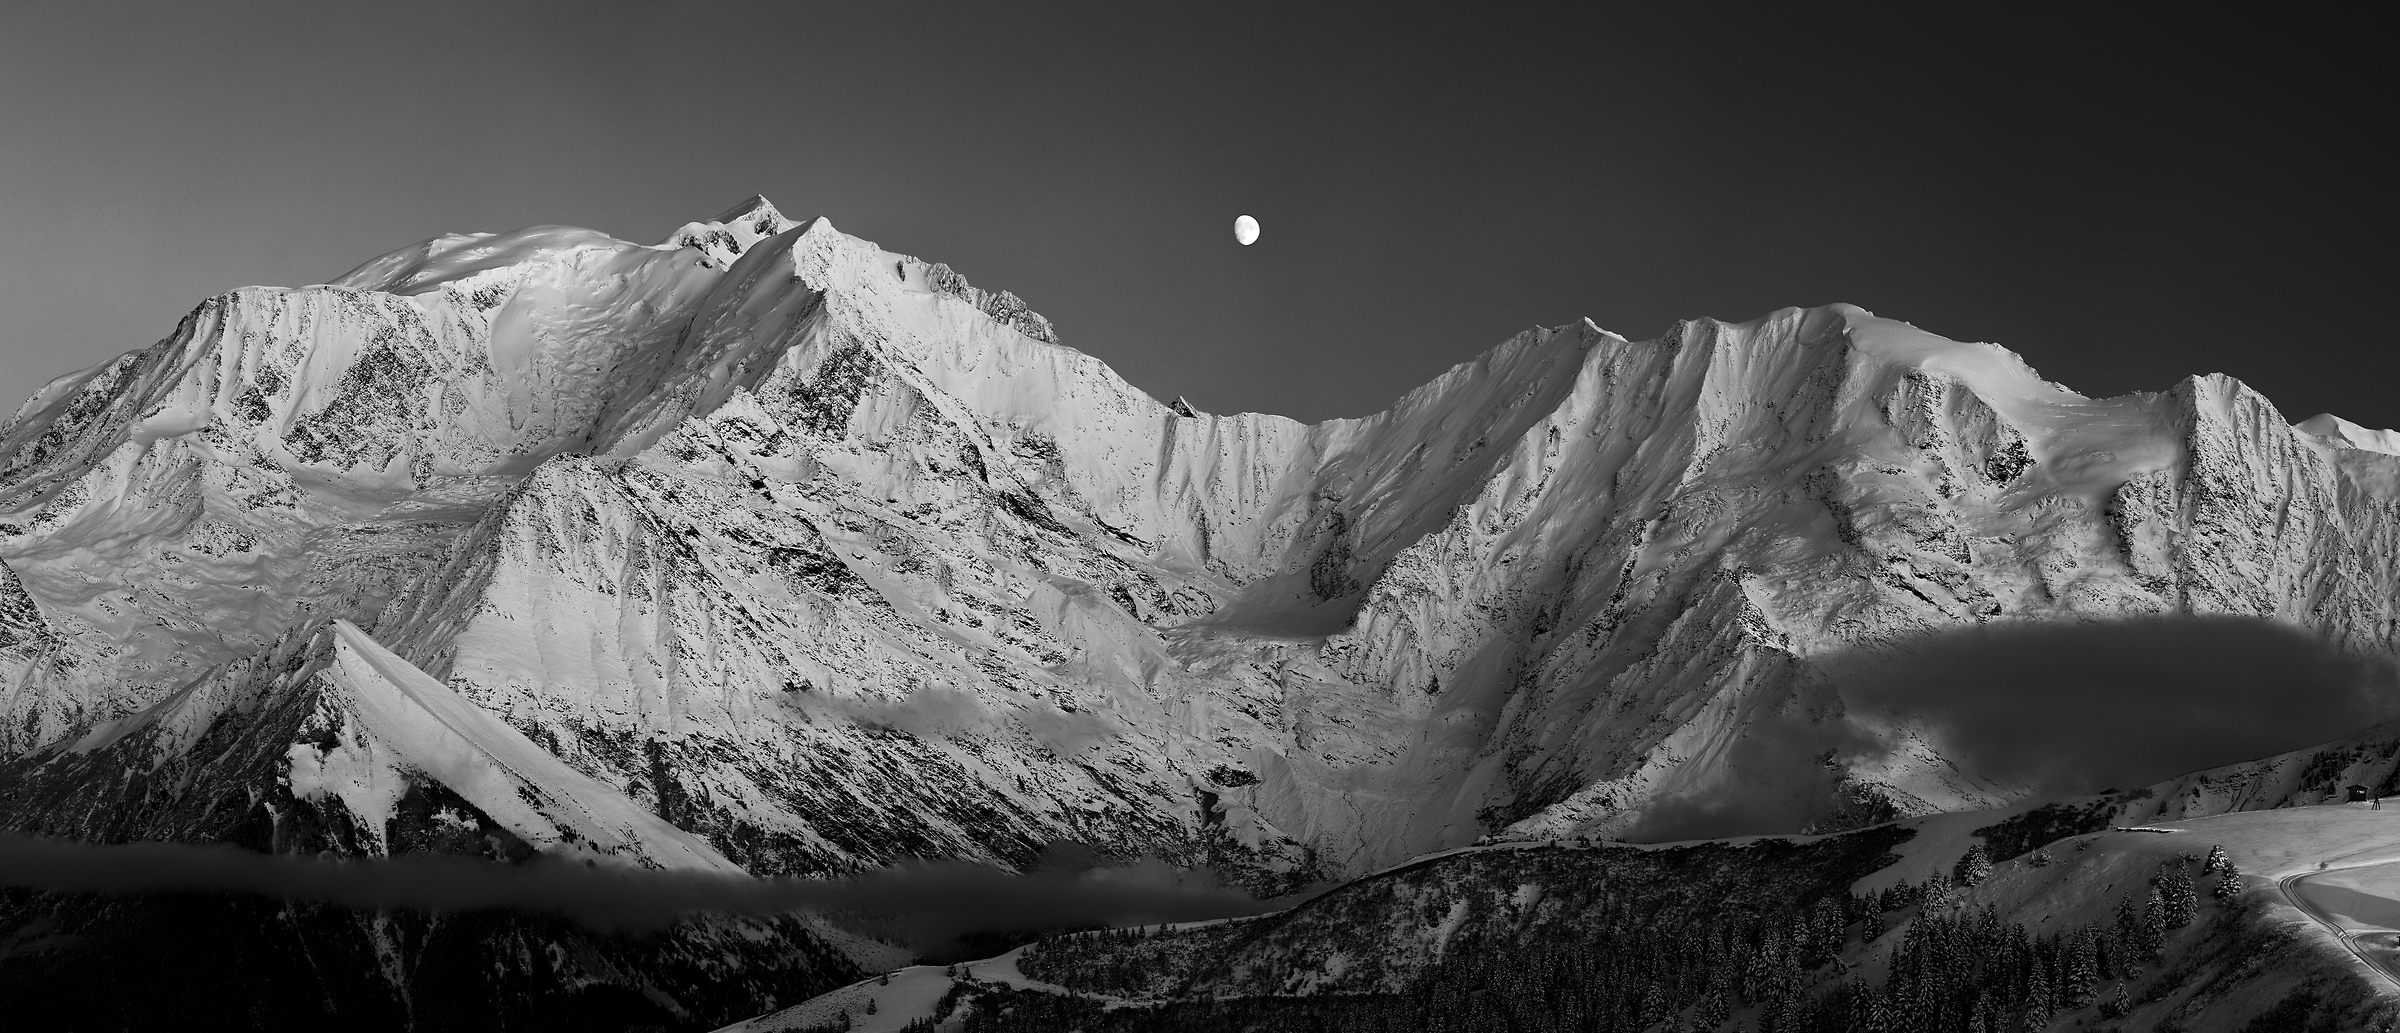 283 megapixels! A very high resolution, large-format VAST photo print of a mountain range with the moon at nighttime; black & white landscape photograph created by Alexandre Deschaumes in Mont Blanc Massif, Saint-Gervais-les-Bains, France